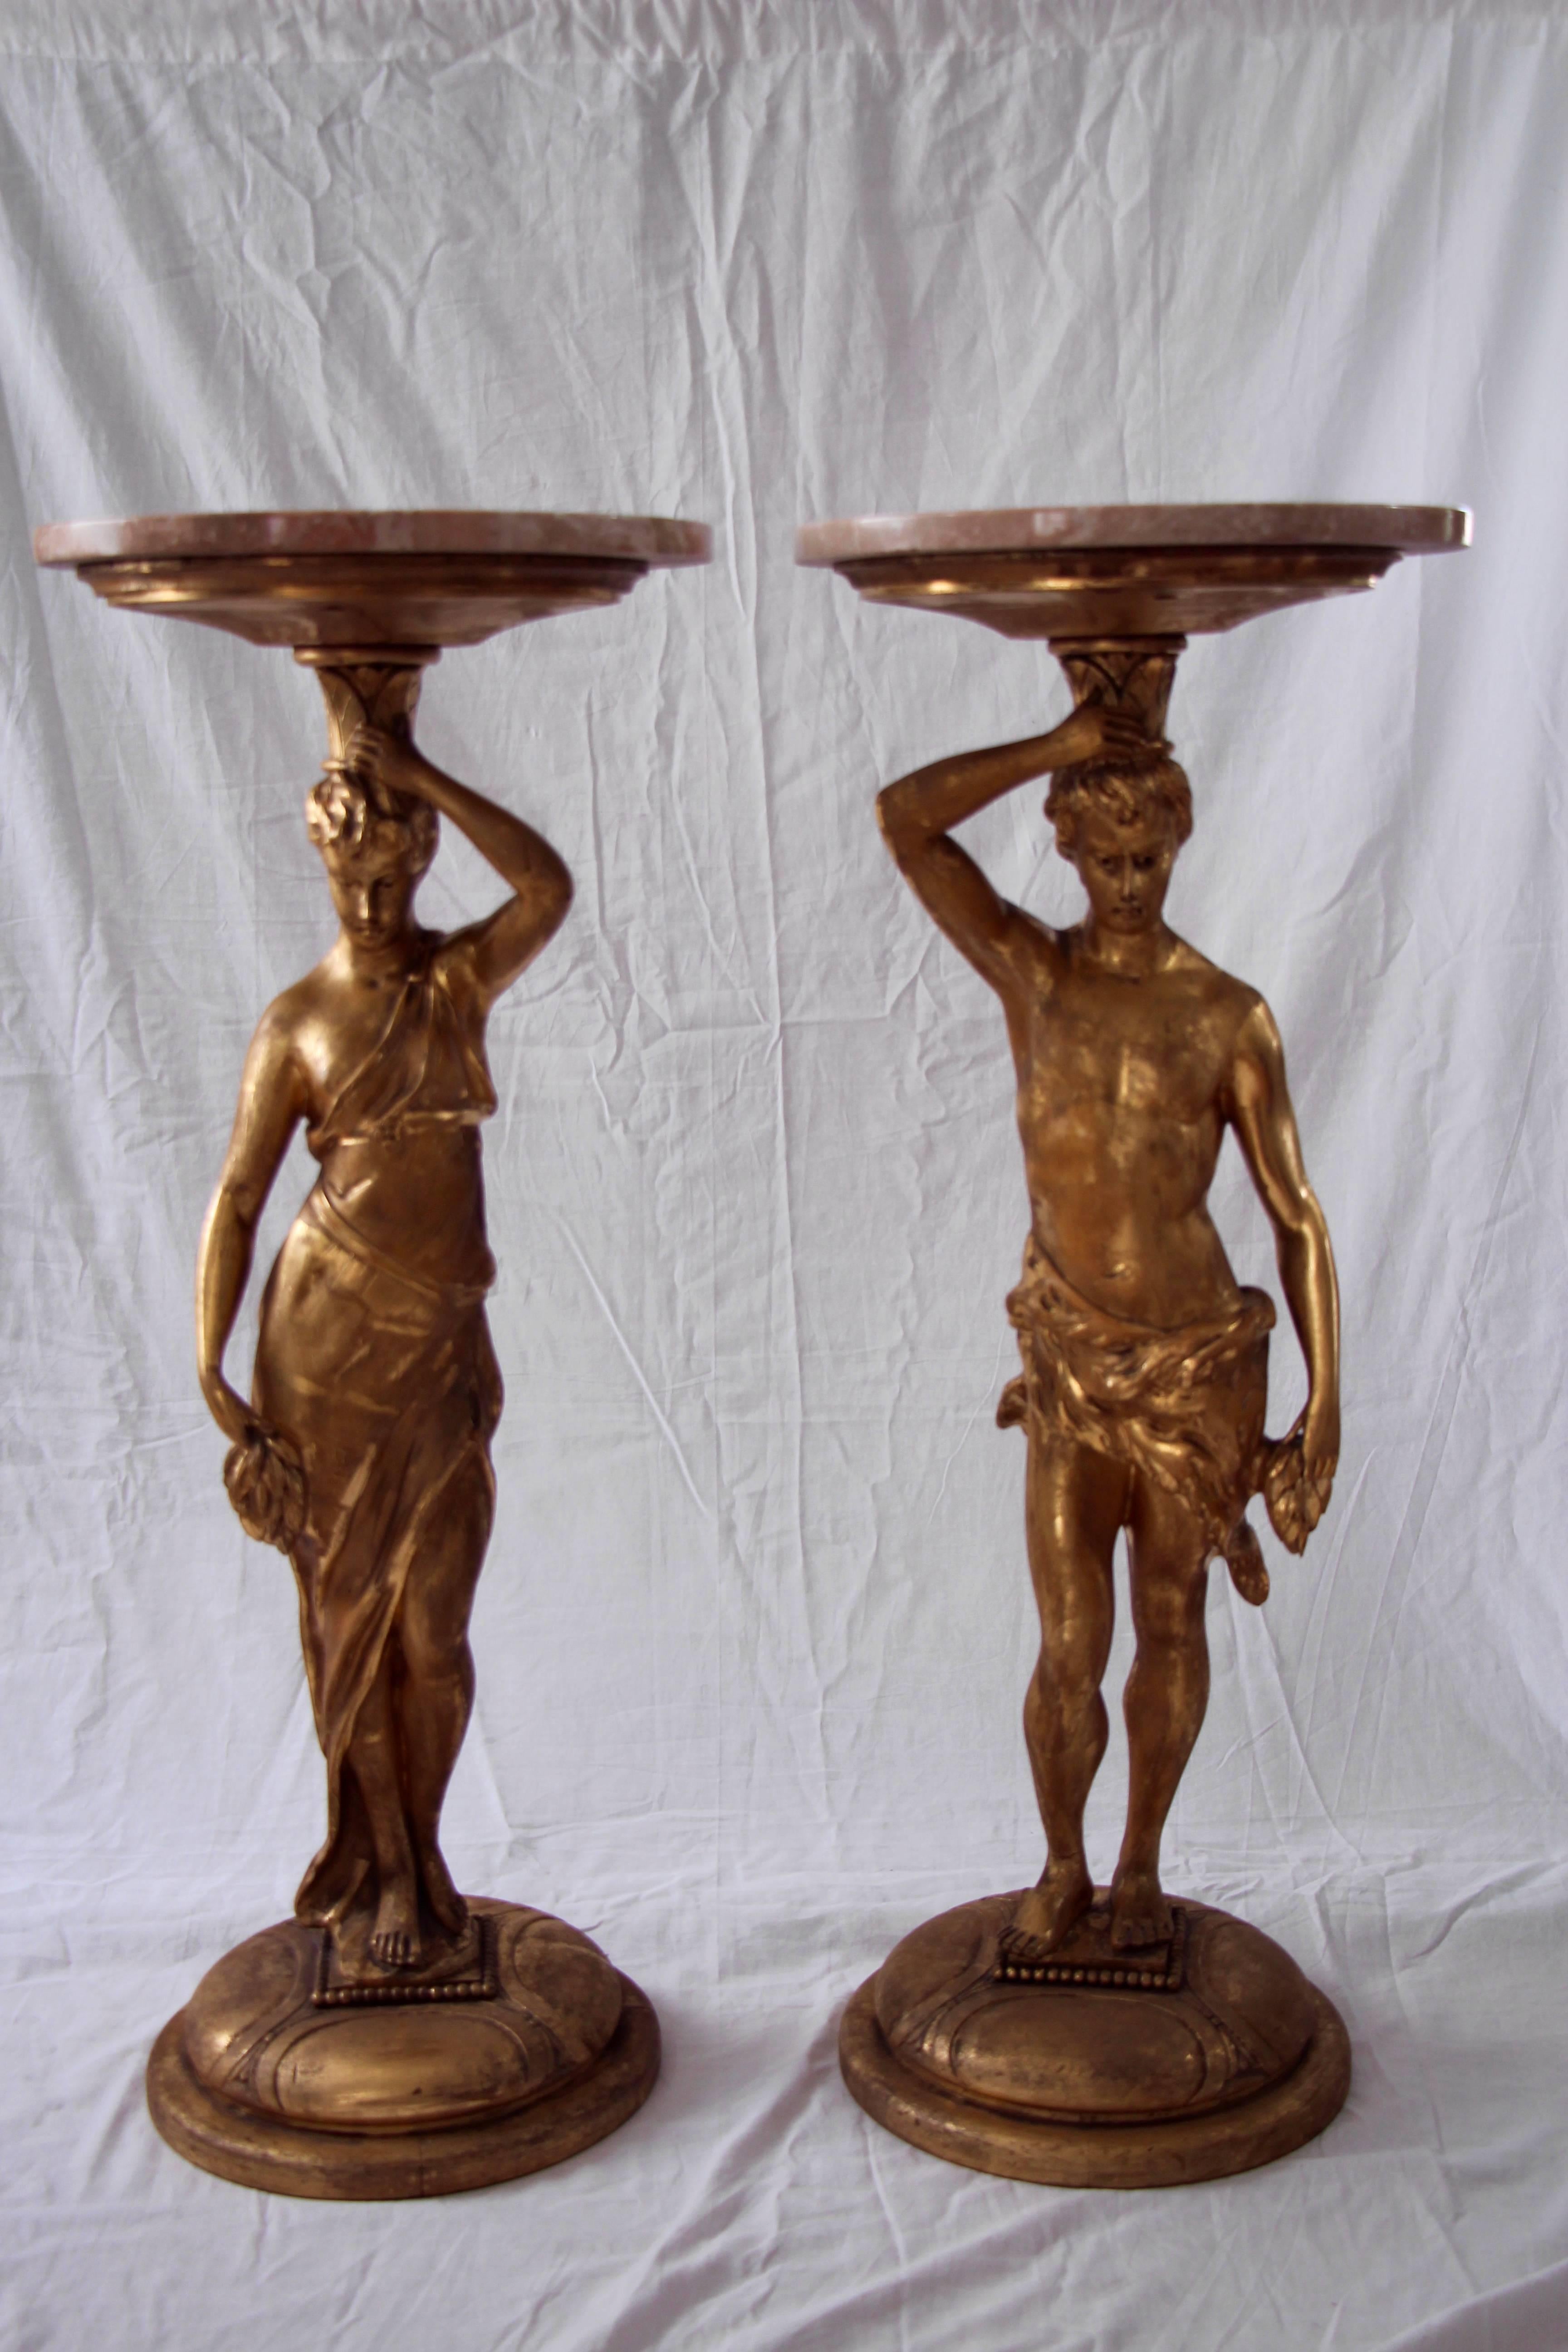 Unique pair of side tables in form of a male and a female caryatid figure, with marble-tops. Beautifully carved and gilded wood.